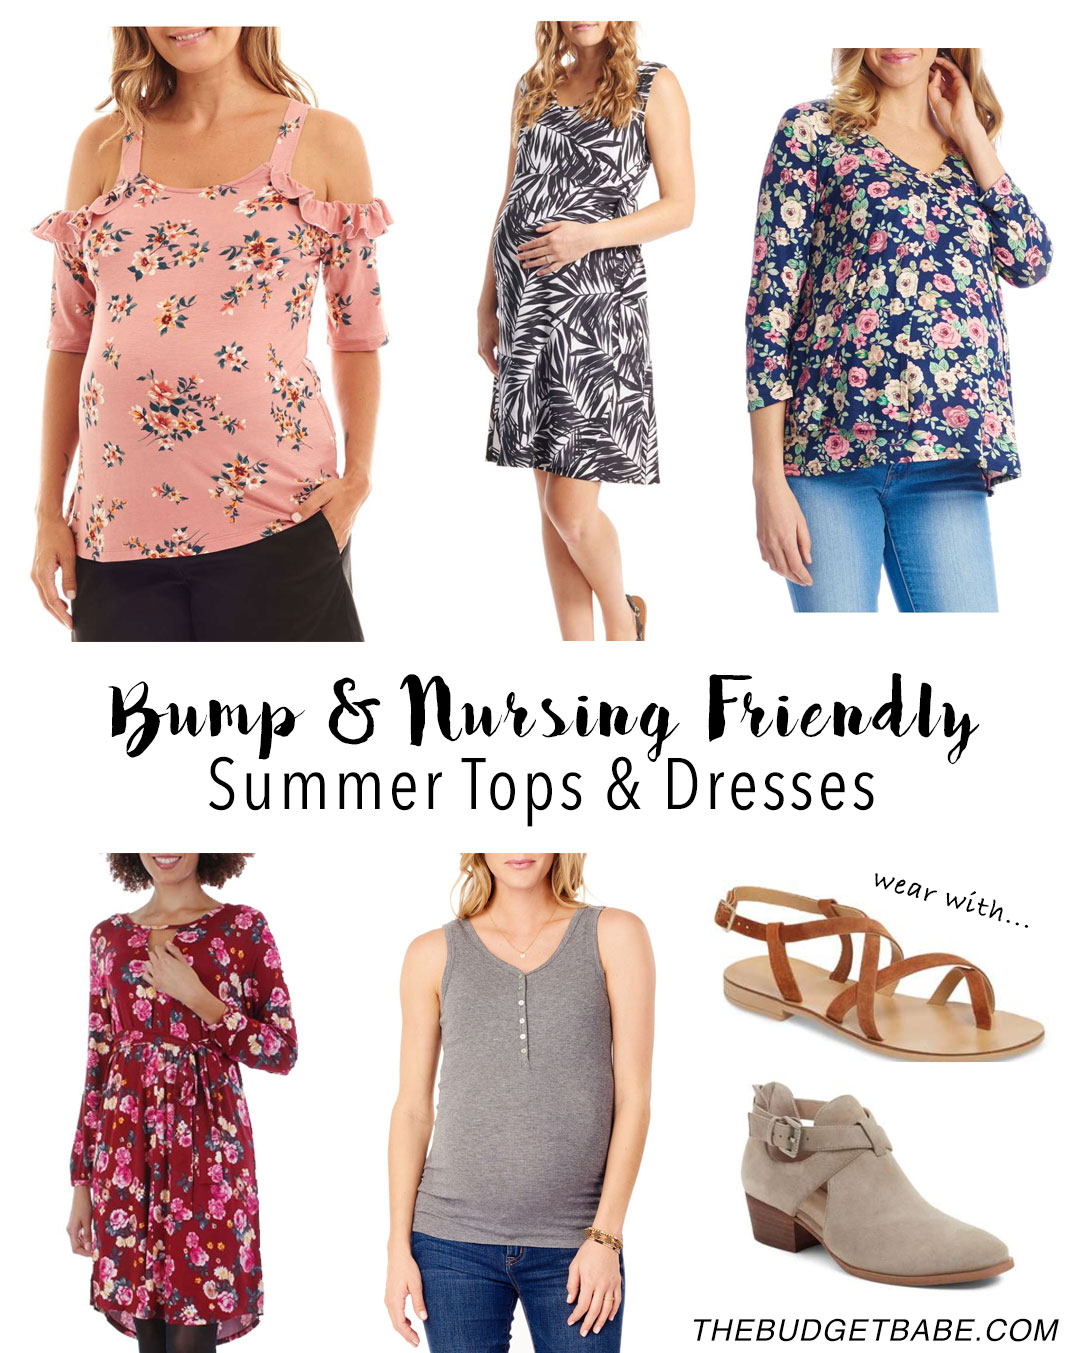 Bump friendly, nursing friendly casual everyday tops and dresses for summer / TheBudgeBabe.com